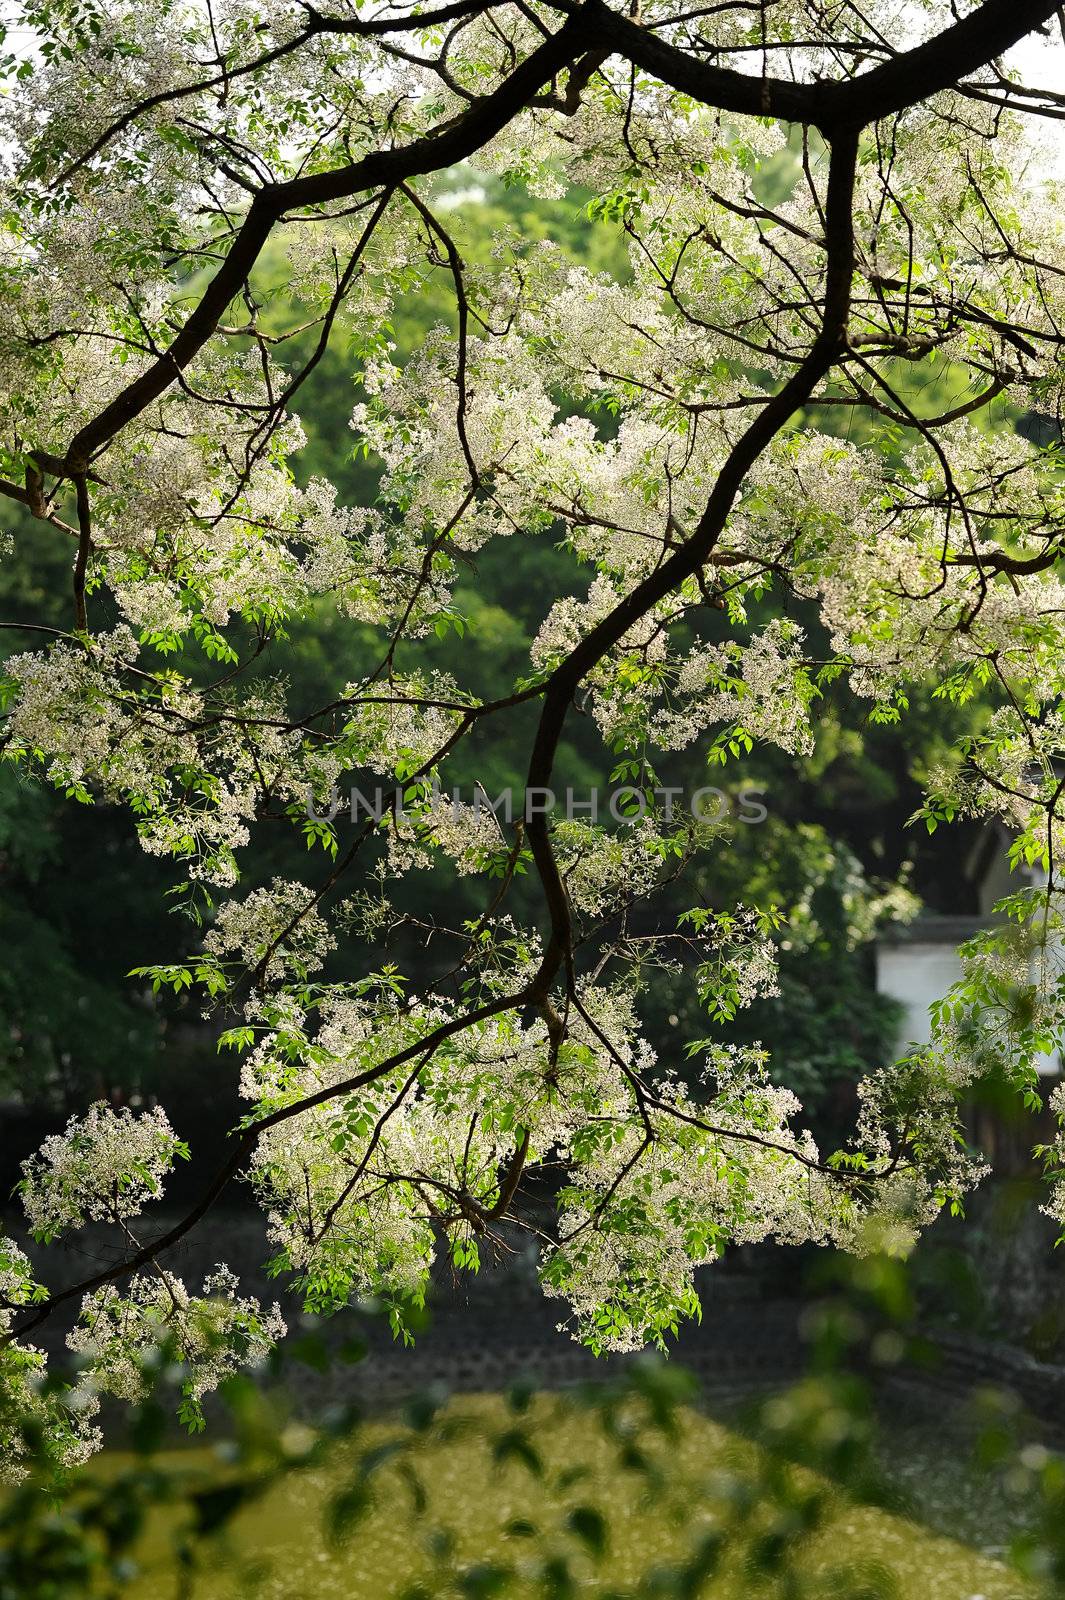 Nature background of white flowers on tree, Chinaberry (melia azedarach), shot in Taiwan, Asia.